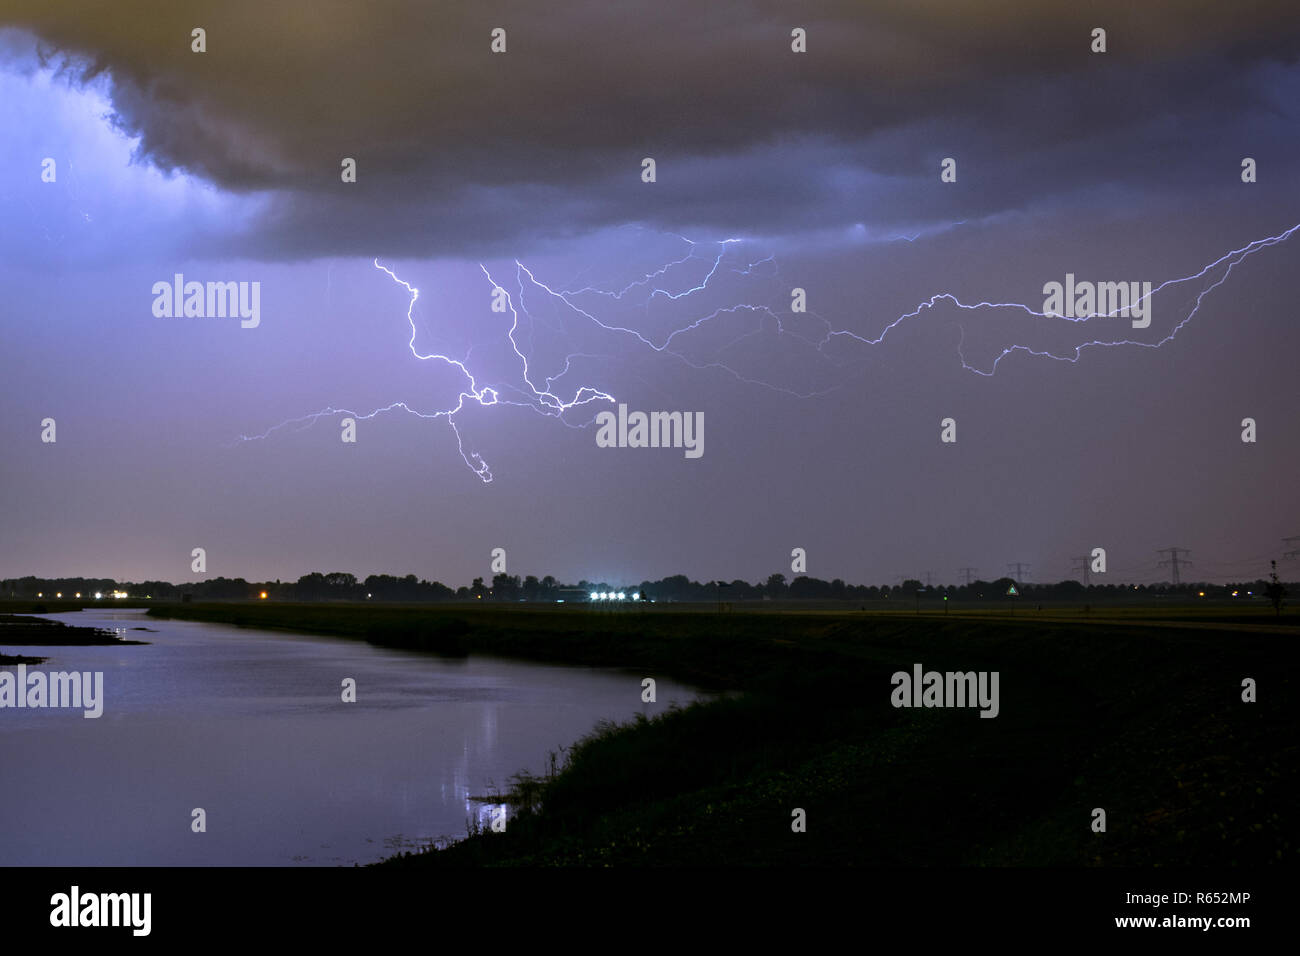 Lightning bolts in the sky over a lake in the vicinity of Rotterdam, The Netherlands.  Photographed during a severe summer thunderstorm. Stock Photo